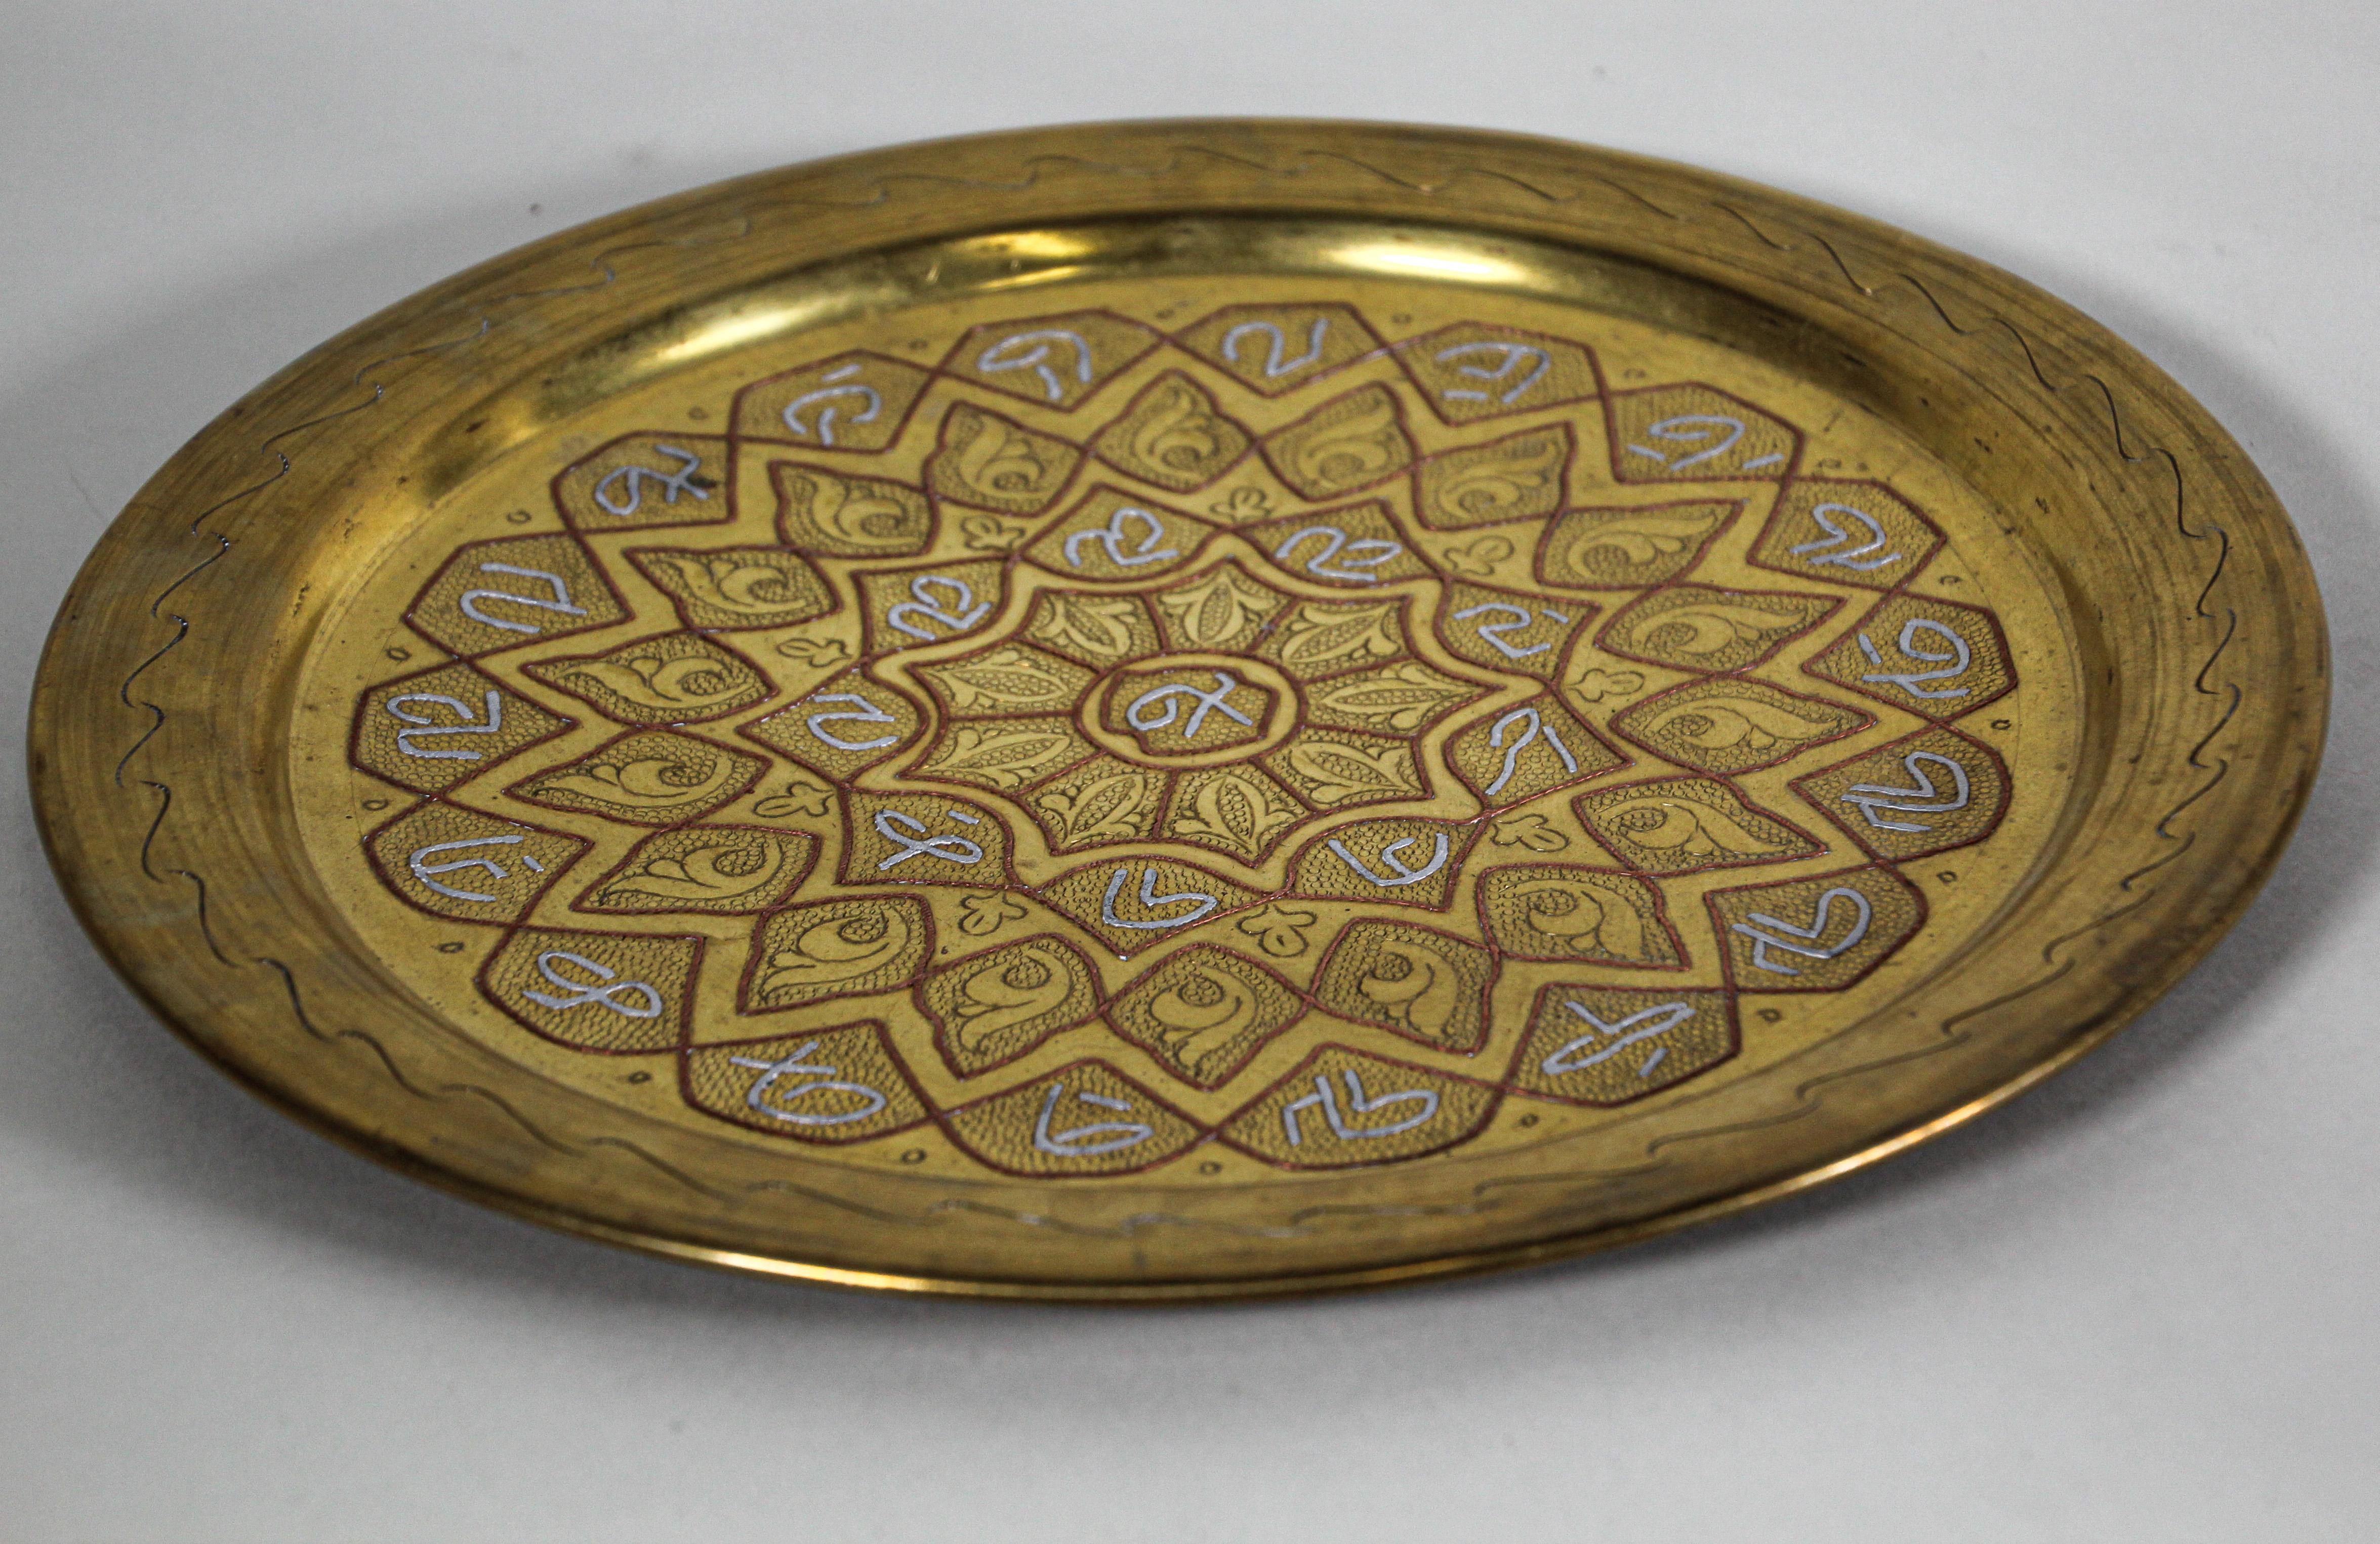 Egyptian Middle Eastern Tray Overlaid with Islamic Writing in Silver In Good Condition For Sale In North Hollywood, CA